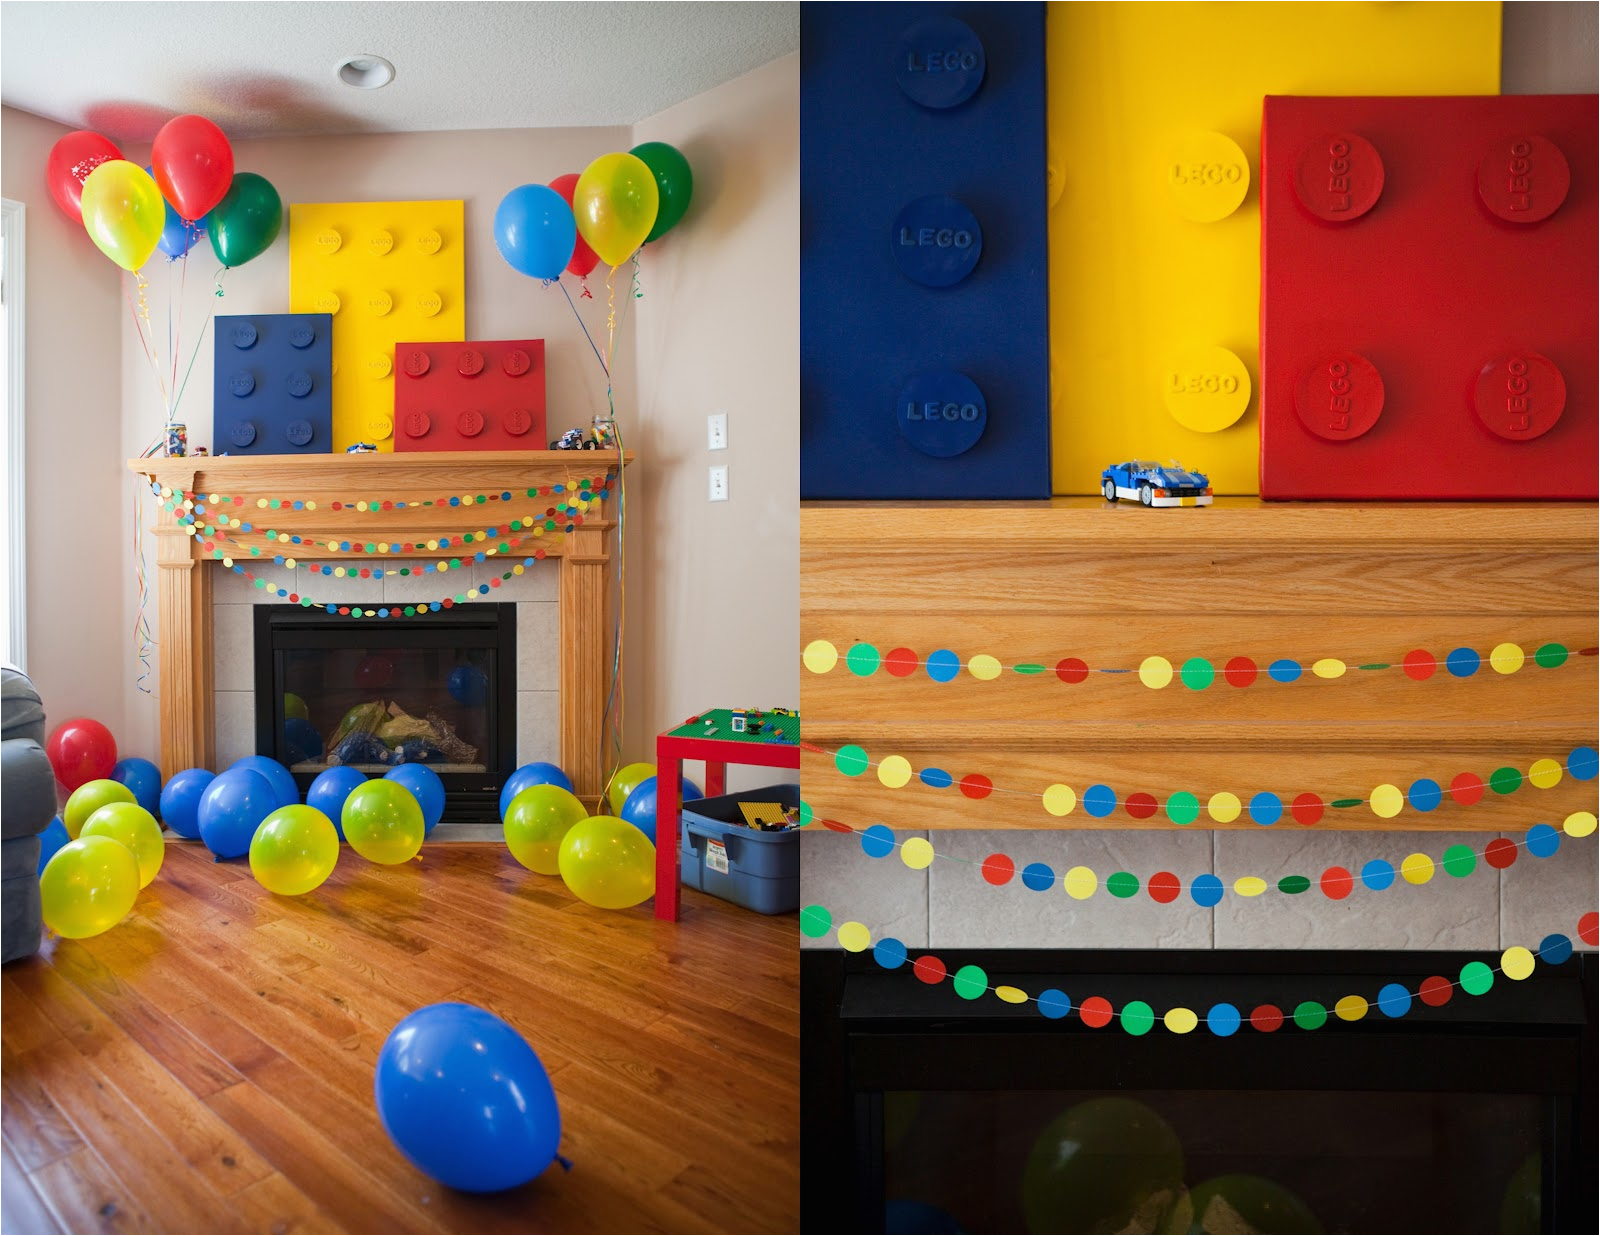 Lego Birthday Party Decoration Ideas Homemade Serenity the Lego Party Part One